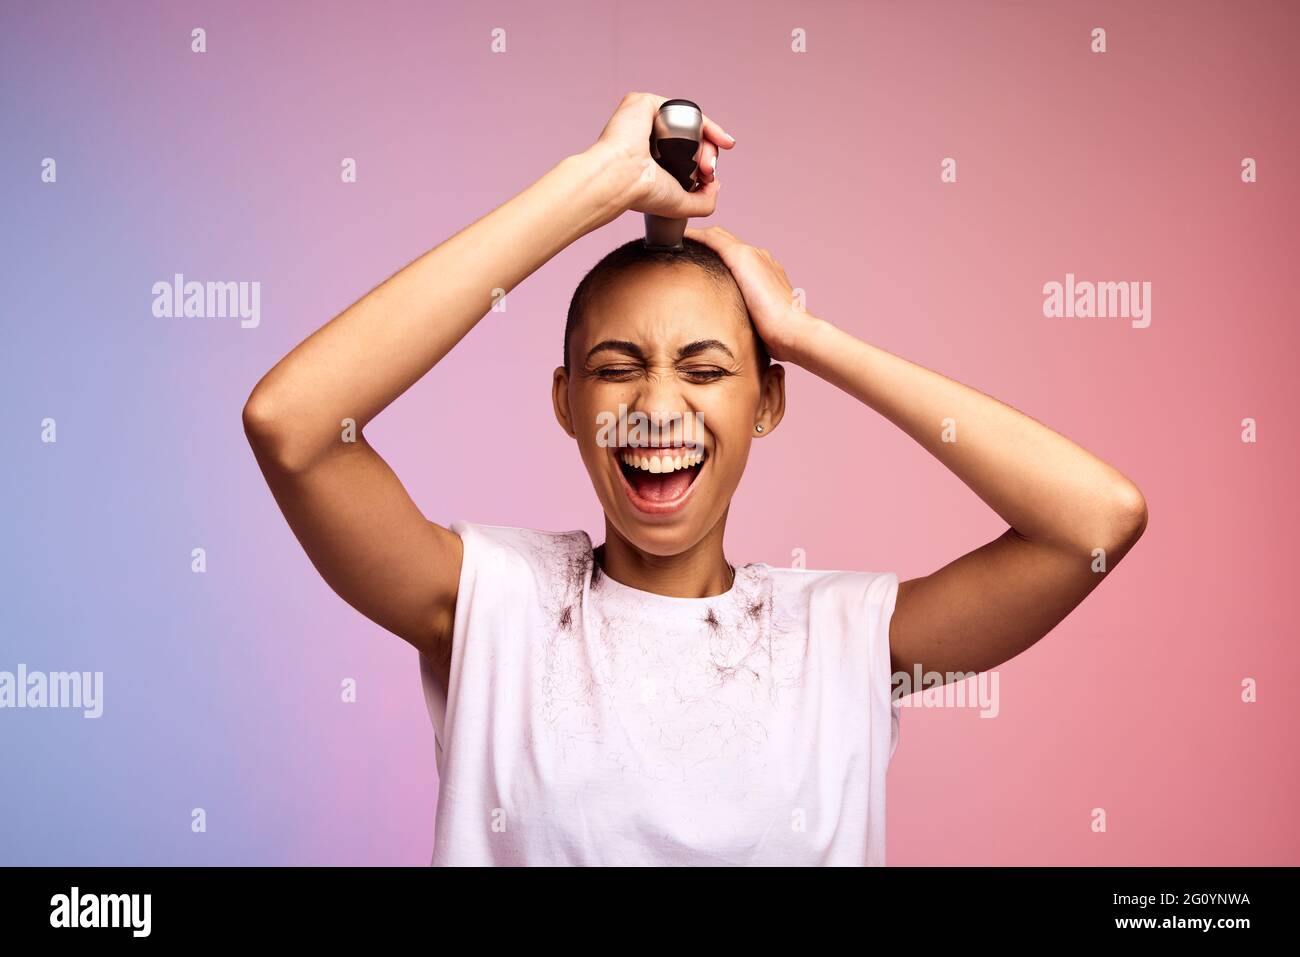 Woman trimming her head to bald on multicolored background. Female shaving off her hair with hair clippers. Stock Photo